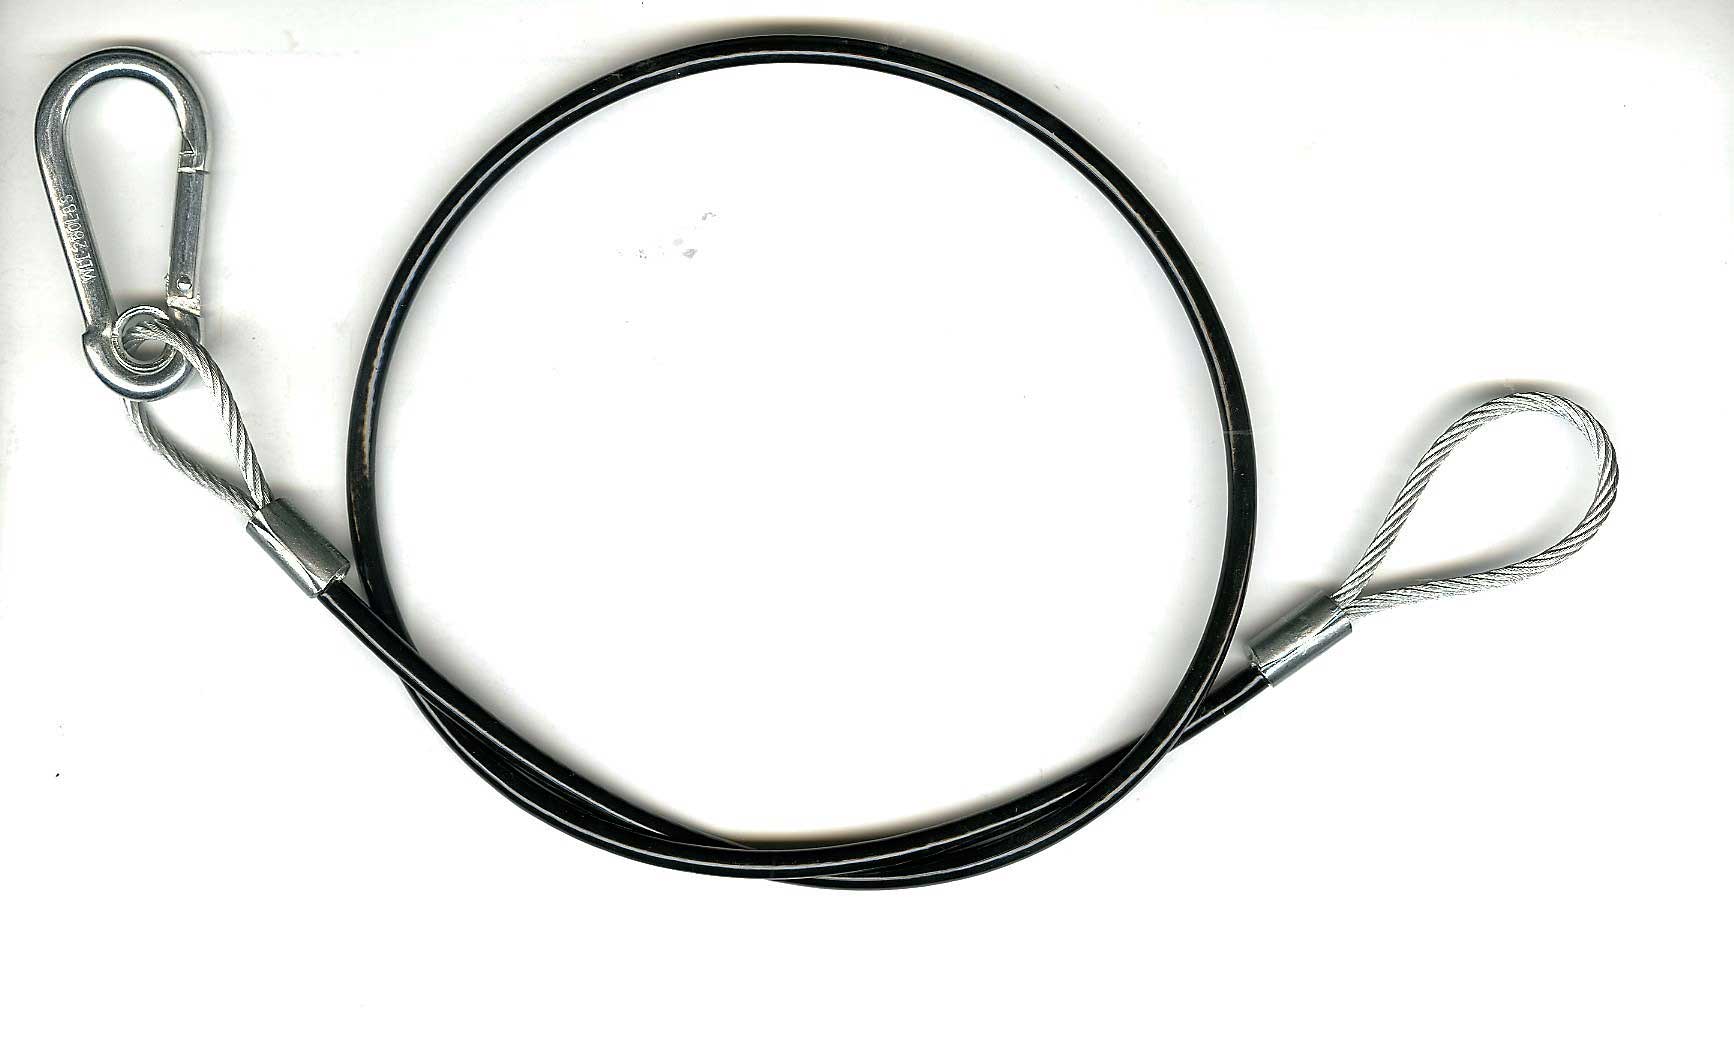 1/8 X 30 Black PVC Coated Safety Cable with 1/4 Snap